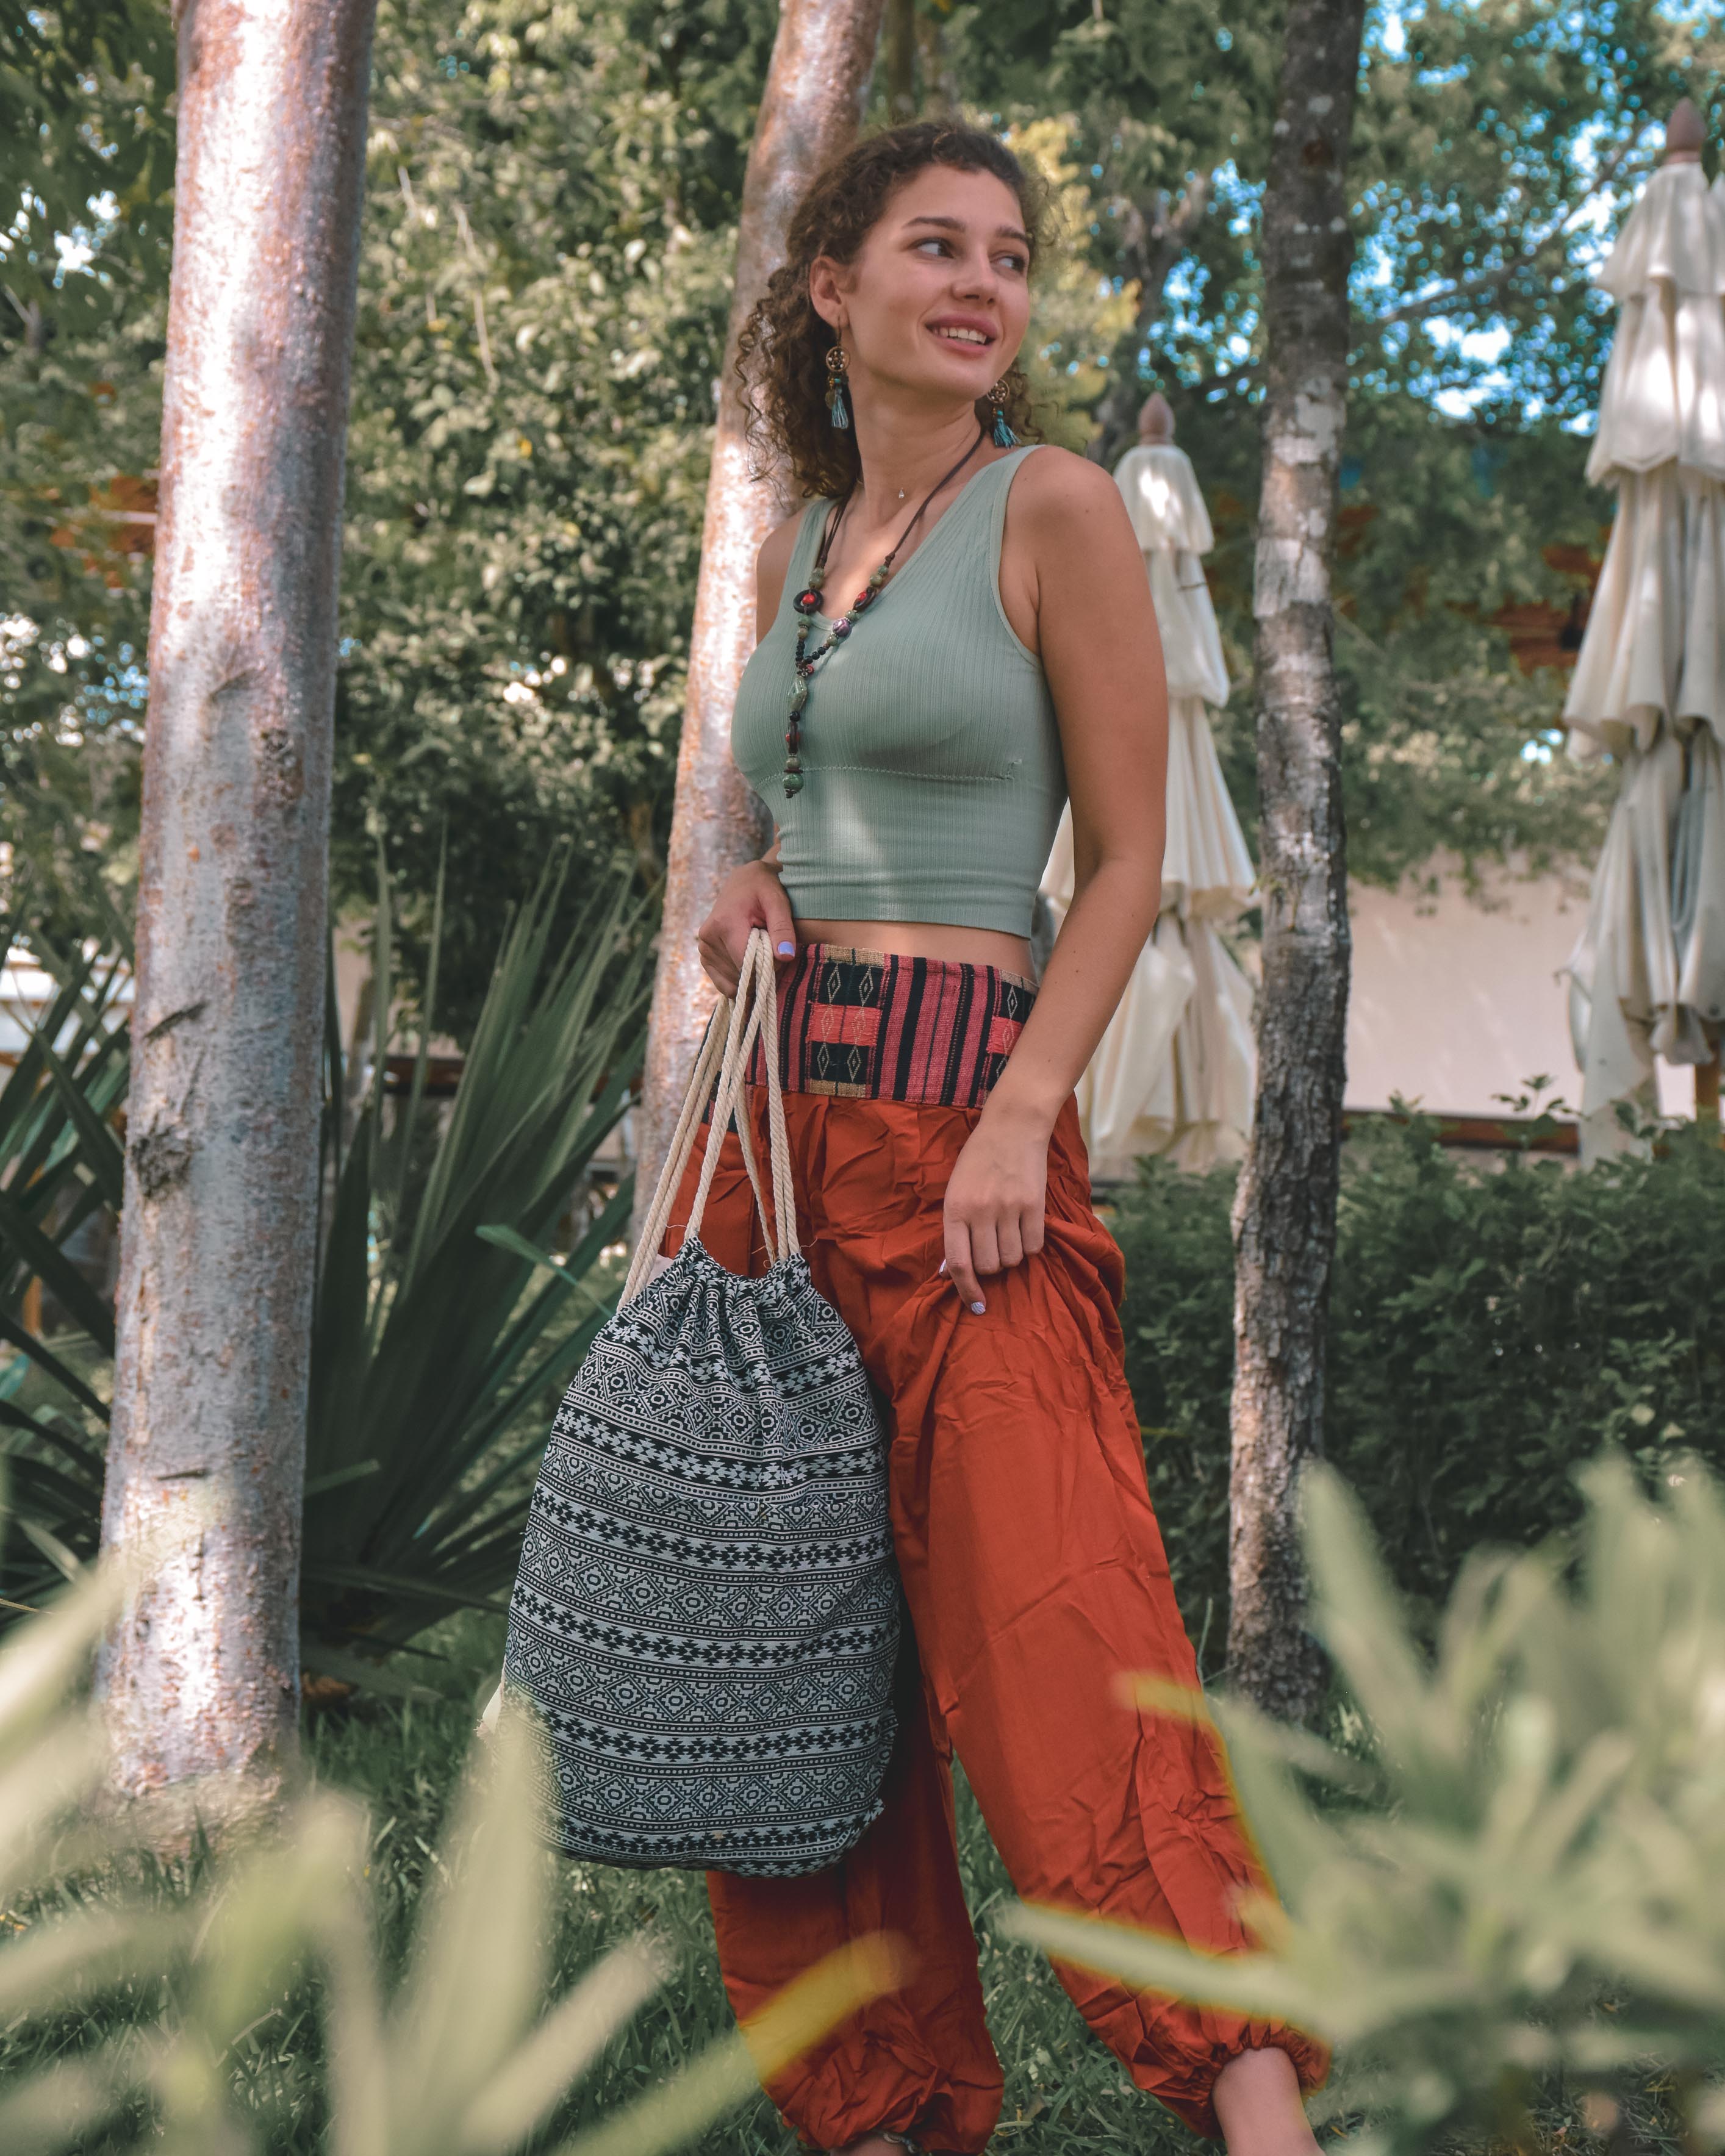 KUXTAL DRAWSTRING BAG Elepanta Travel Bags - Buy Today Elephant Pants Jewelry And Bohemian Clothes Handmade In Thailand Help To Save The Elephants FairTrade And Vegan